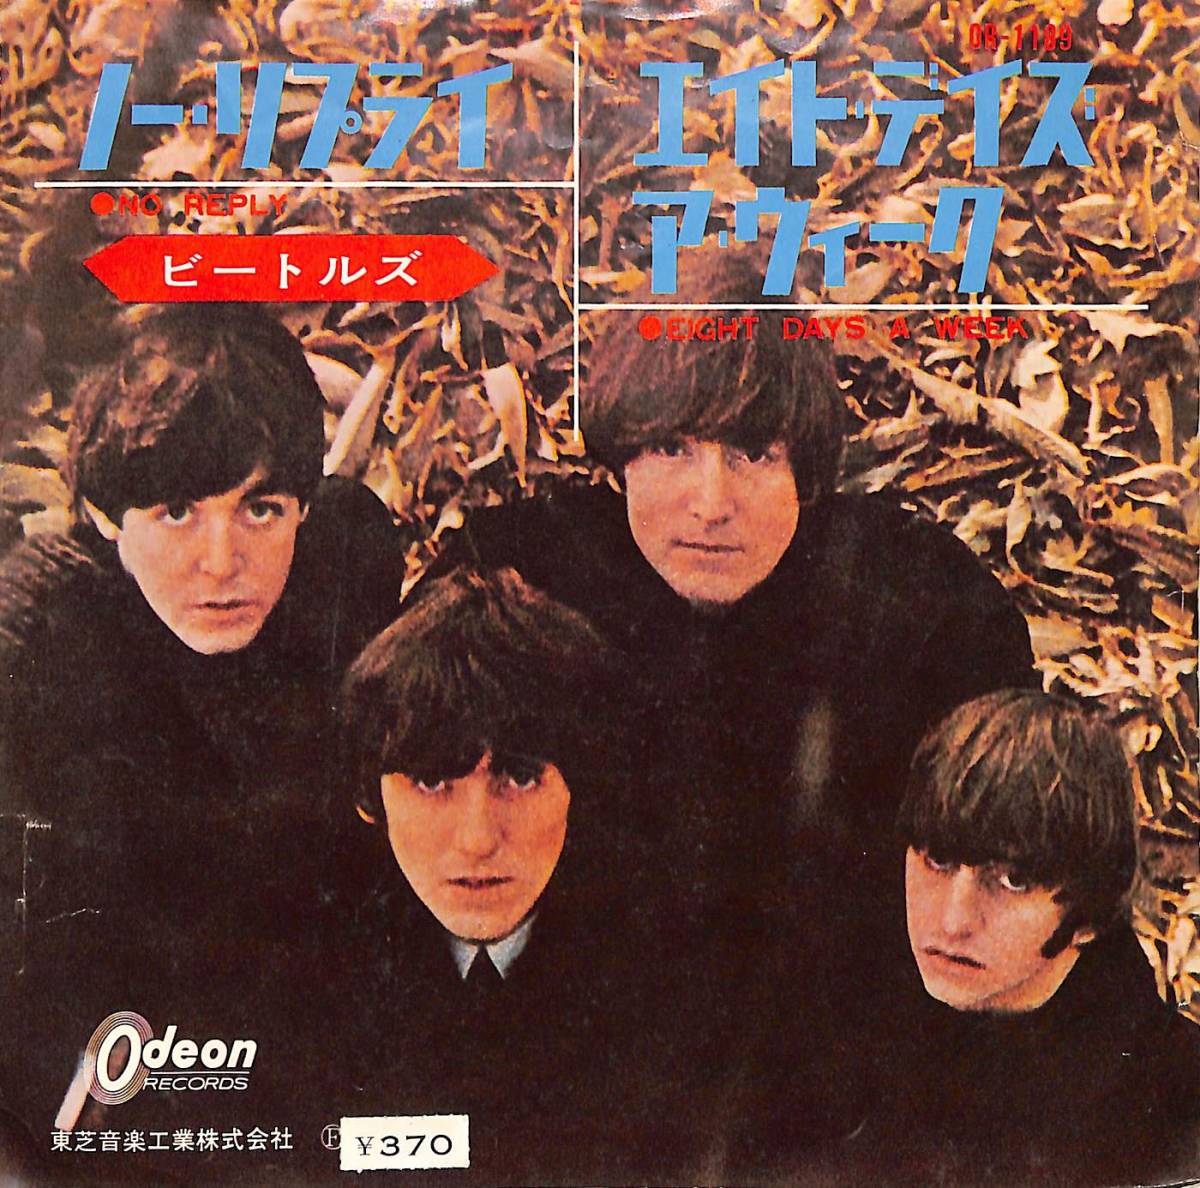 C00196307/EP/ビートルズ「No Reply / Eight Days A Week (1965年・OR-1189・ロックンロール・ビート・BEAT)」_画像1